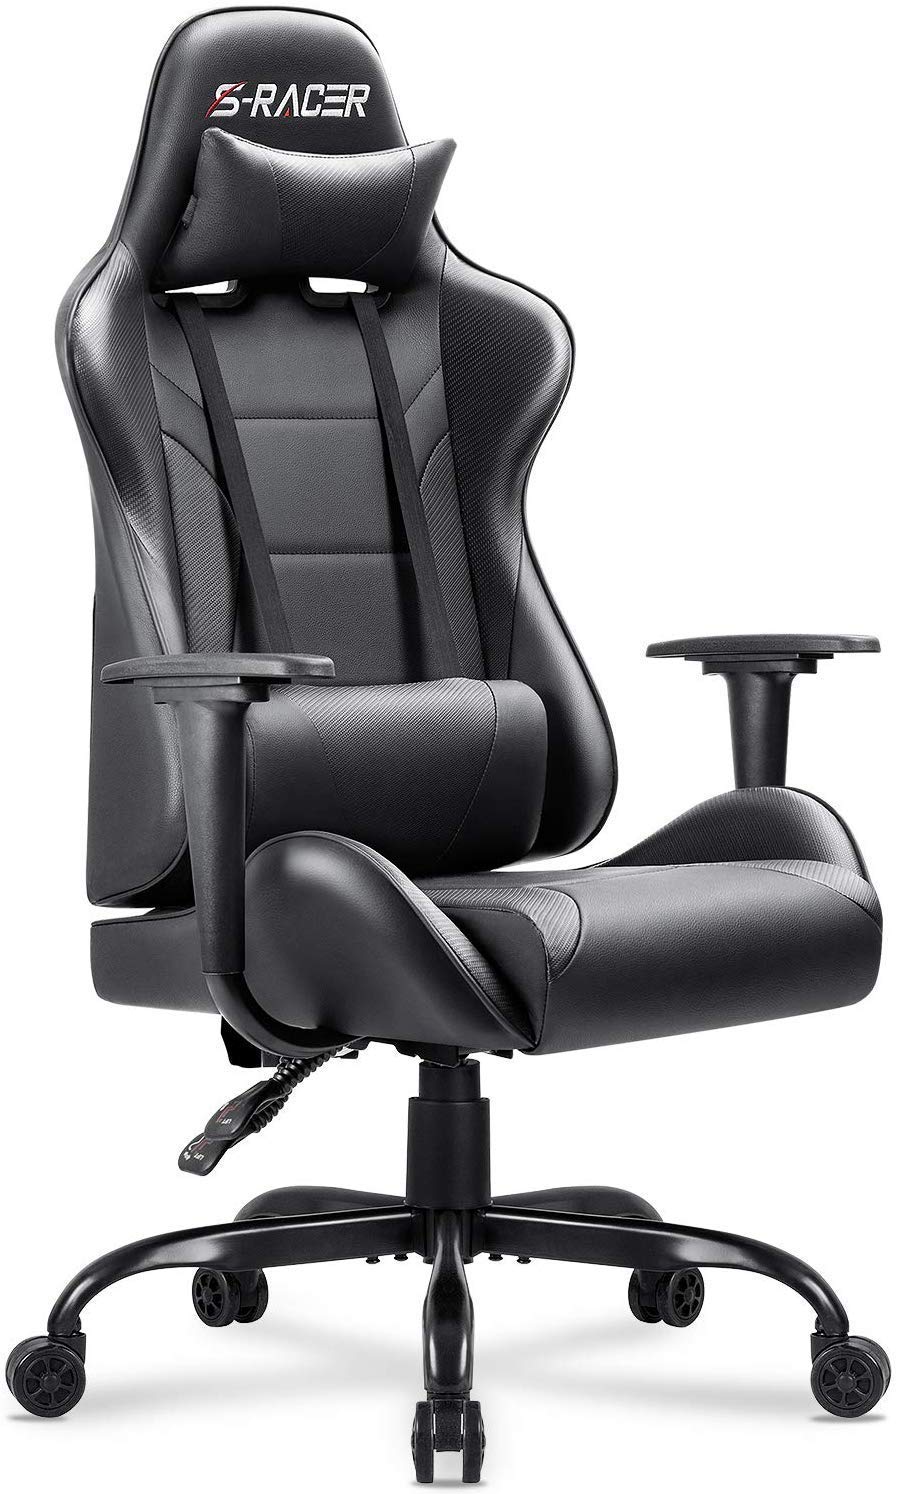 Gaming Office Chair Computer Chair High Back Racing Desk Chair PU Leather Adjustable Seat Height Swivel Chair Ergonomic Executive Chair with Headrest for Adults (Black)